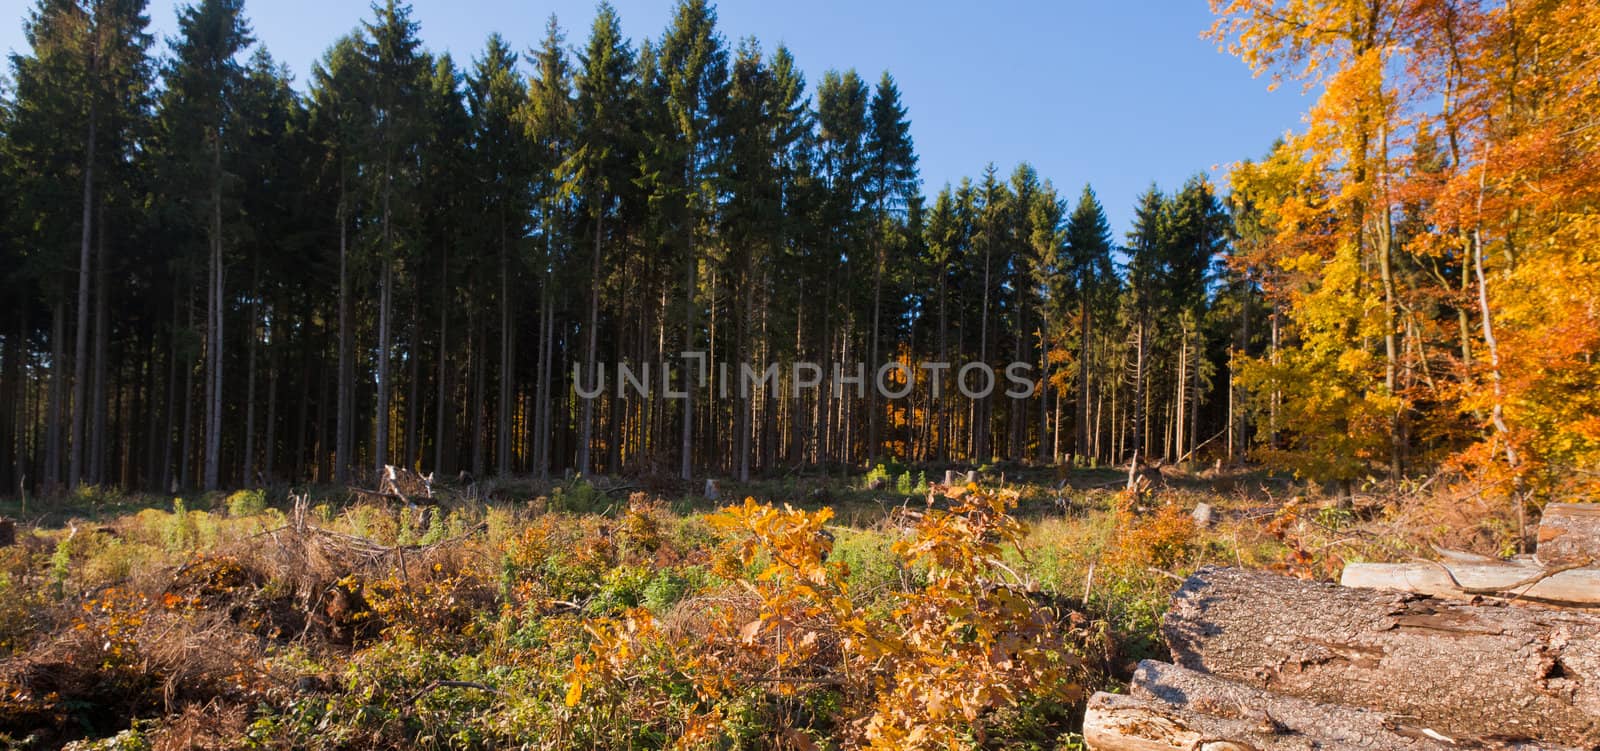 Clearcut Timber and Logpile by PiLens